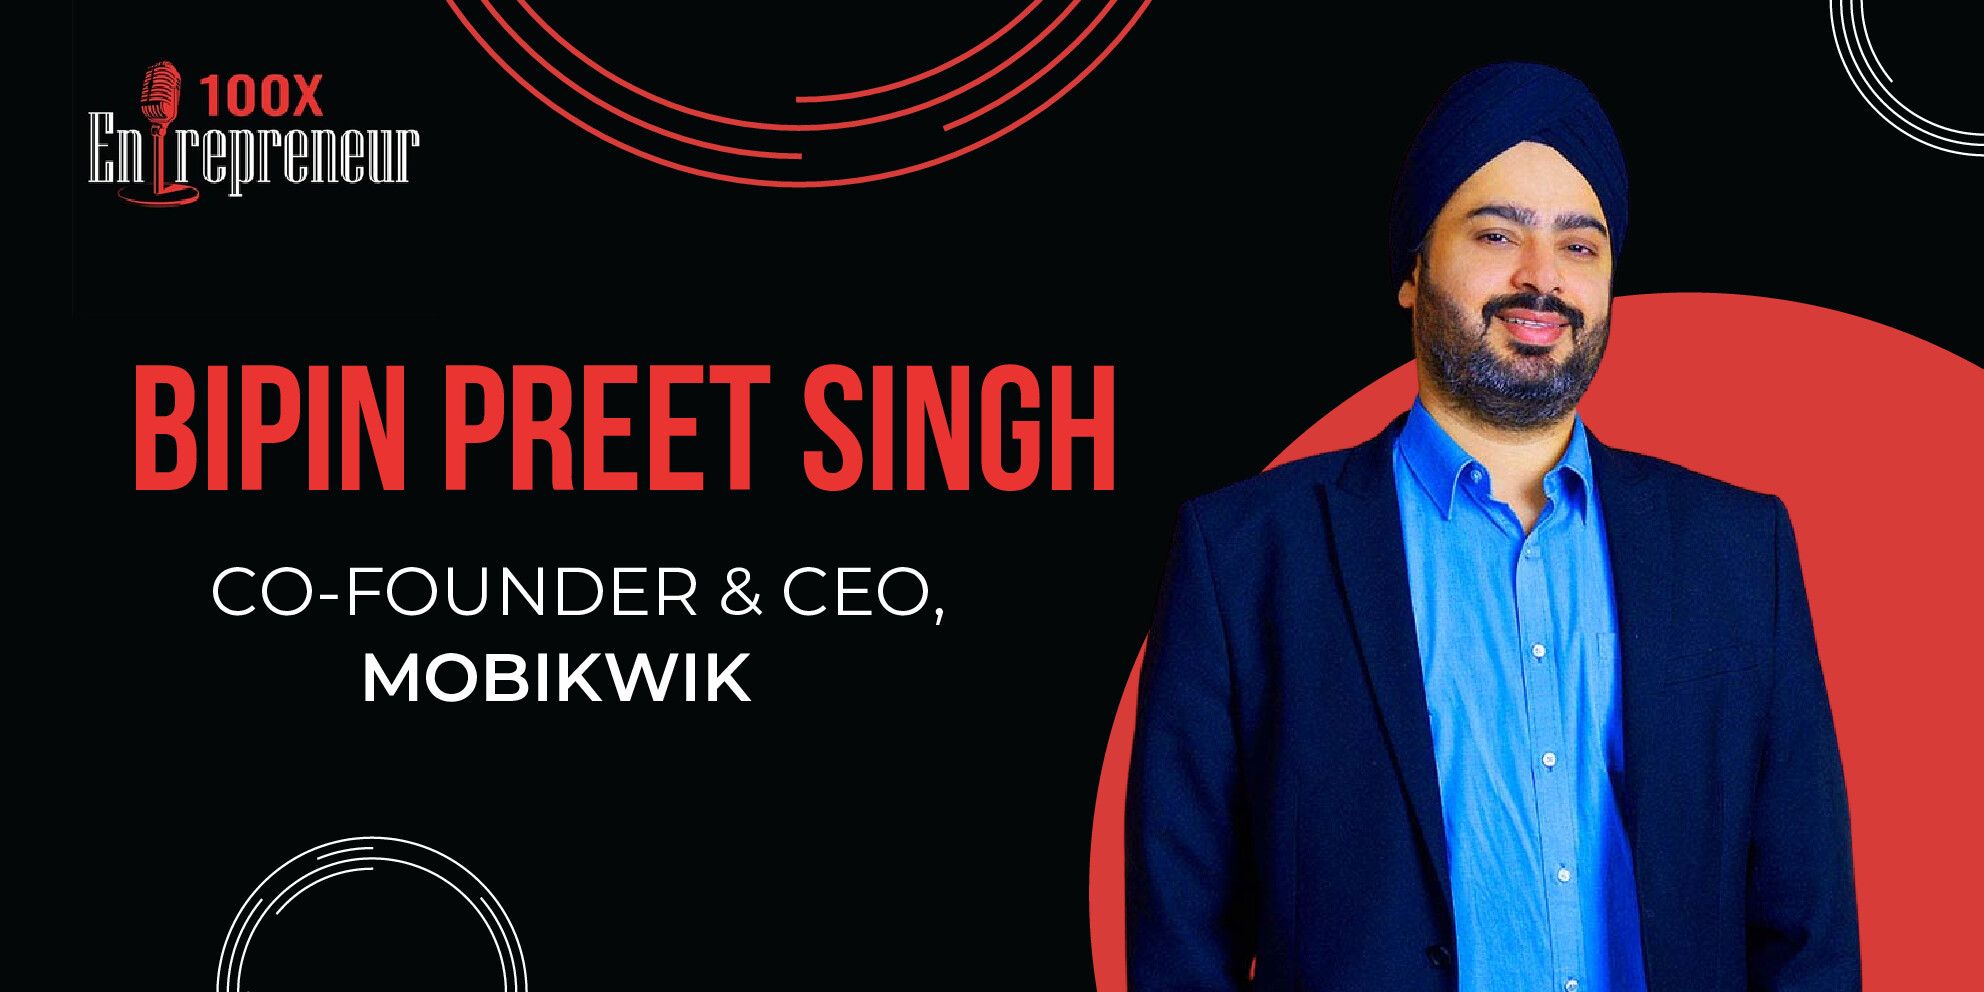 MobiKwik's Bipin Preet Singh on starting a mobile recharge platform to reaching over a 100M users as a digital wallet 